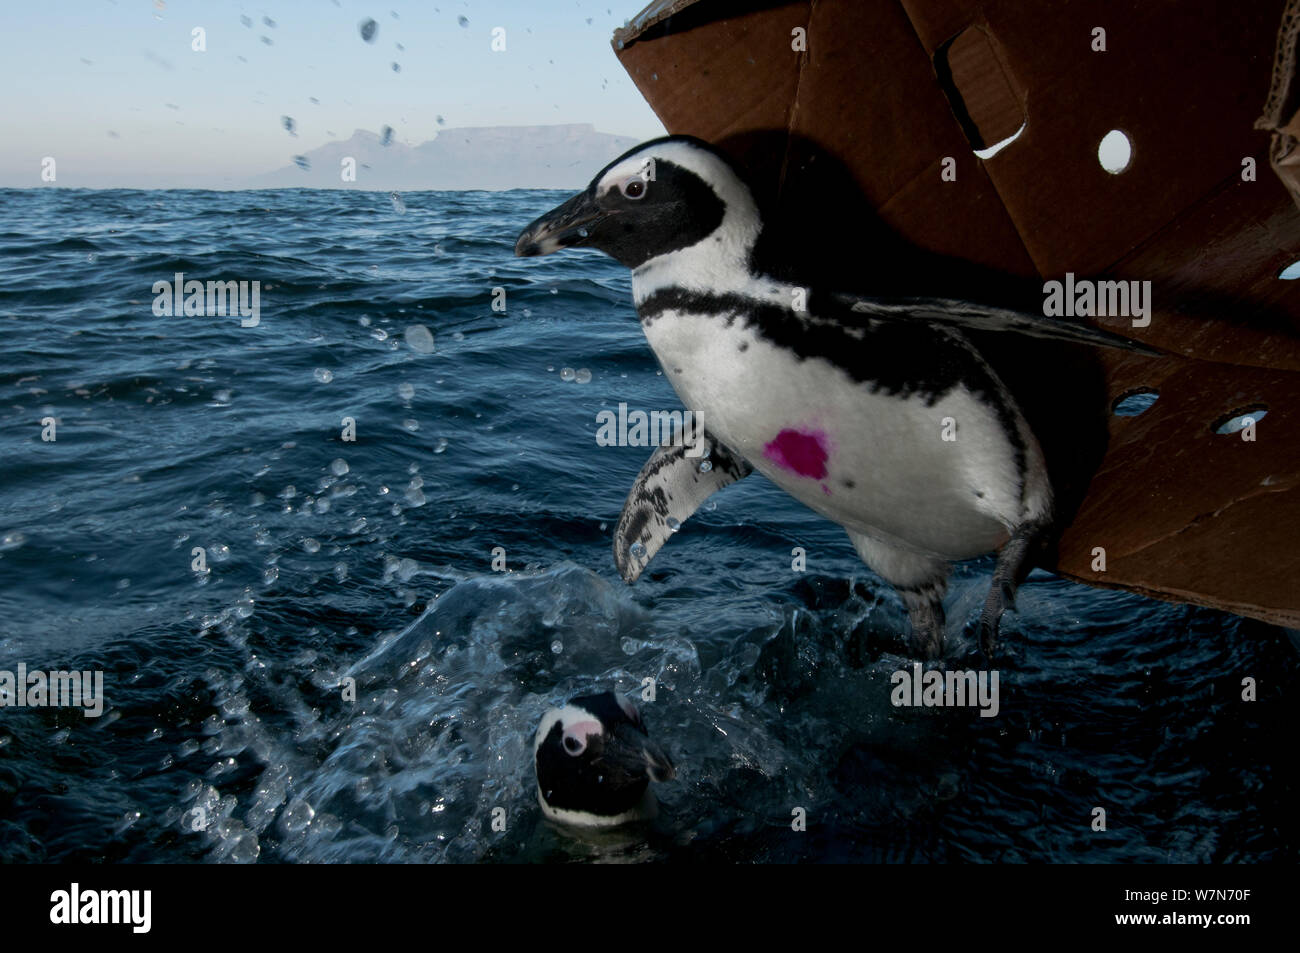 Black footed penguins (Spheniscus demersus) being released at sea near Robben Island in Table Bay after rehabilitation at Southern African Foundation for the Conservation of Coastal Birds (SANCCOB) Cape Town, South Africa Stock Photo